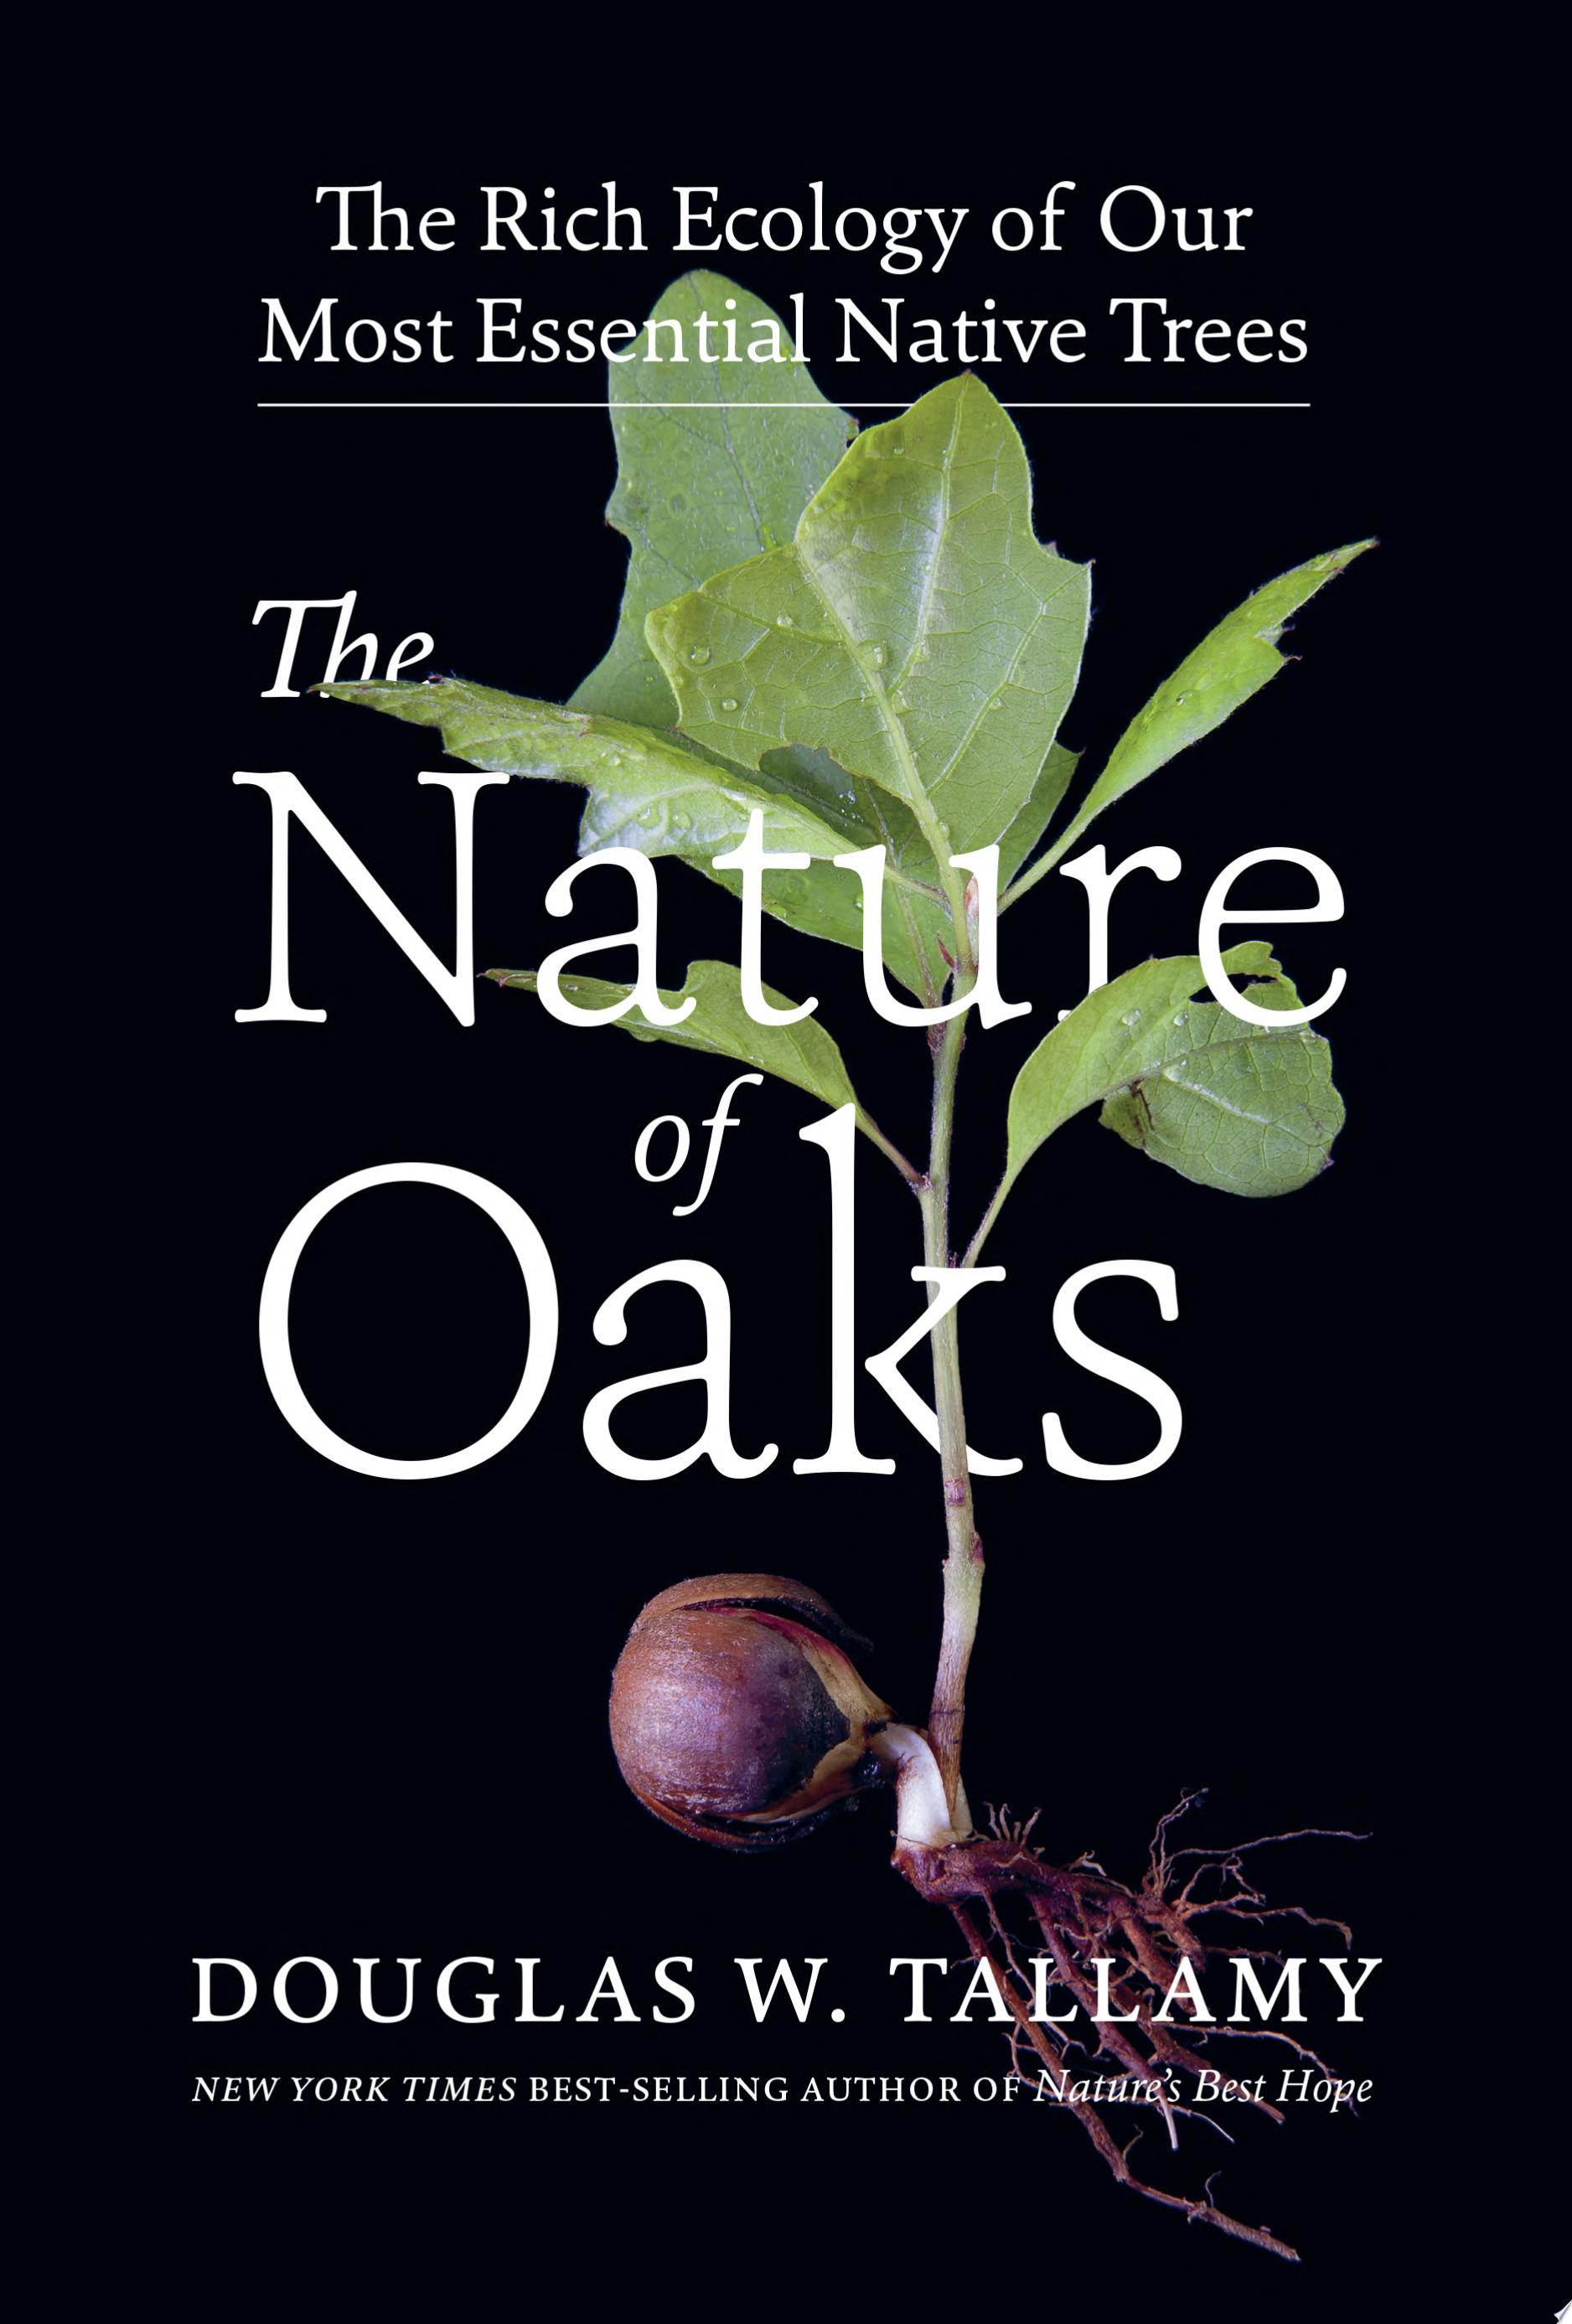 Image for "The Nature of Oaks"